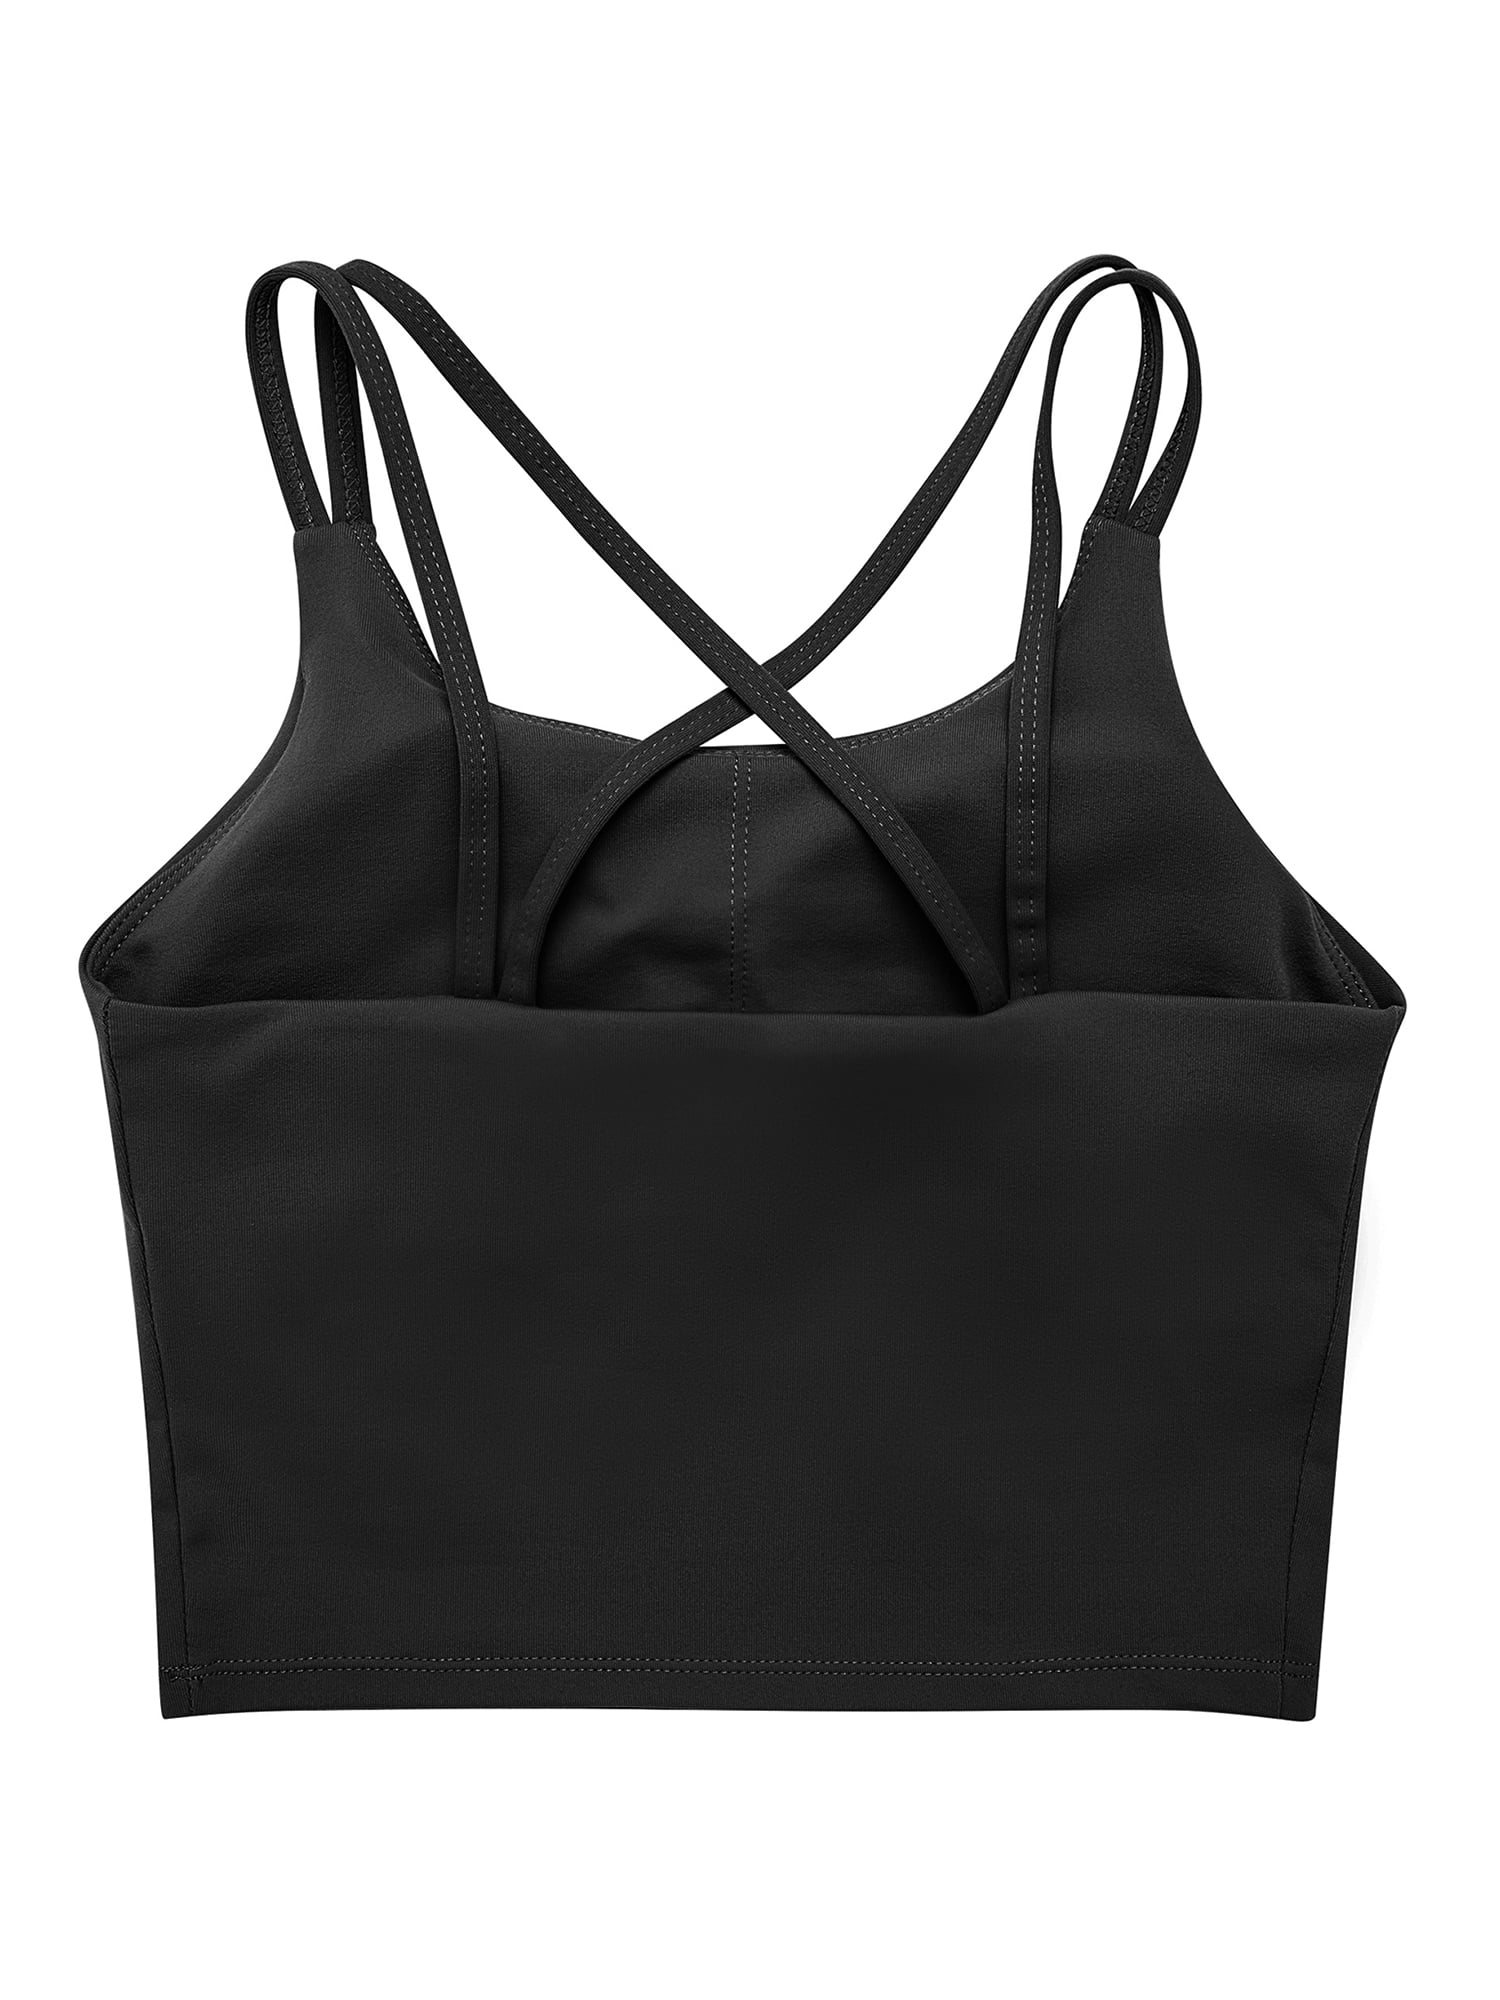 Buy REKITA Crop Tops for Women Racerback Sports Bra with Removable Pads  Workout Tank Top at